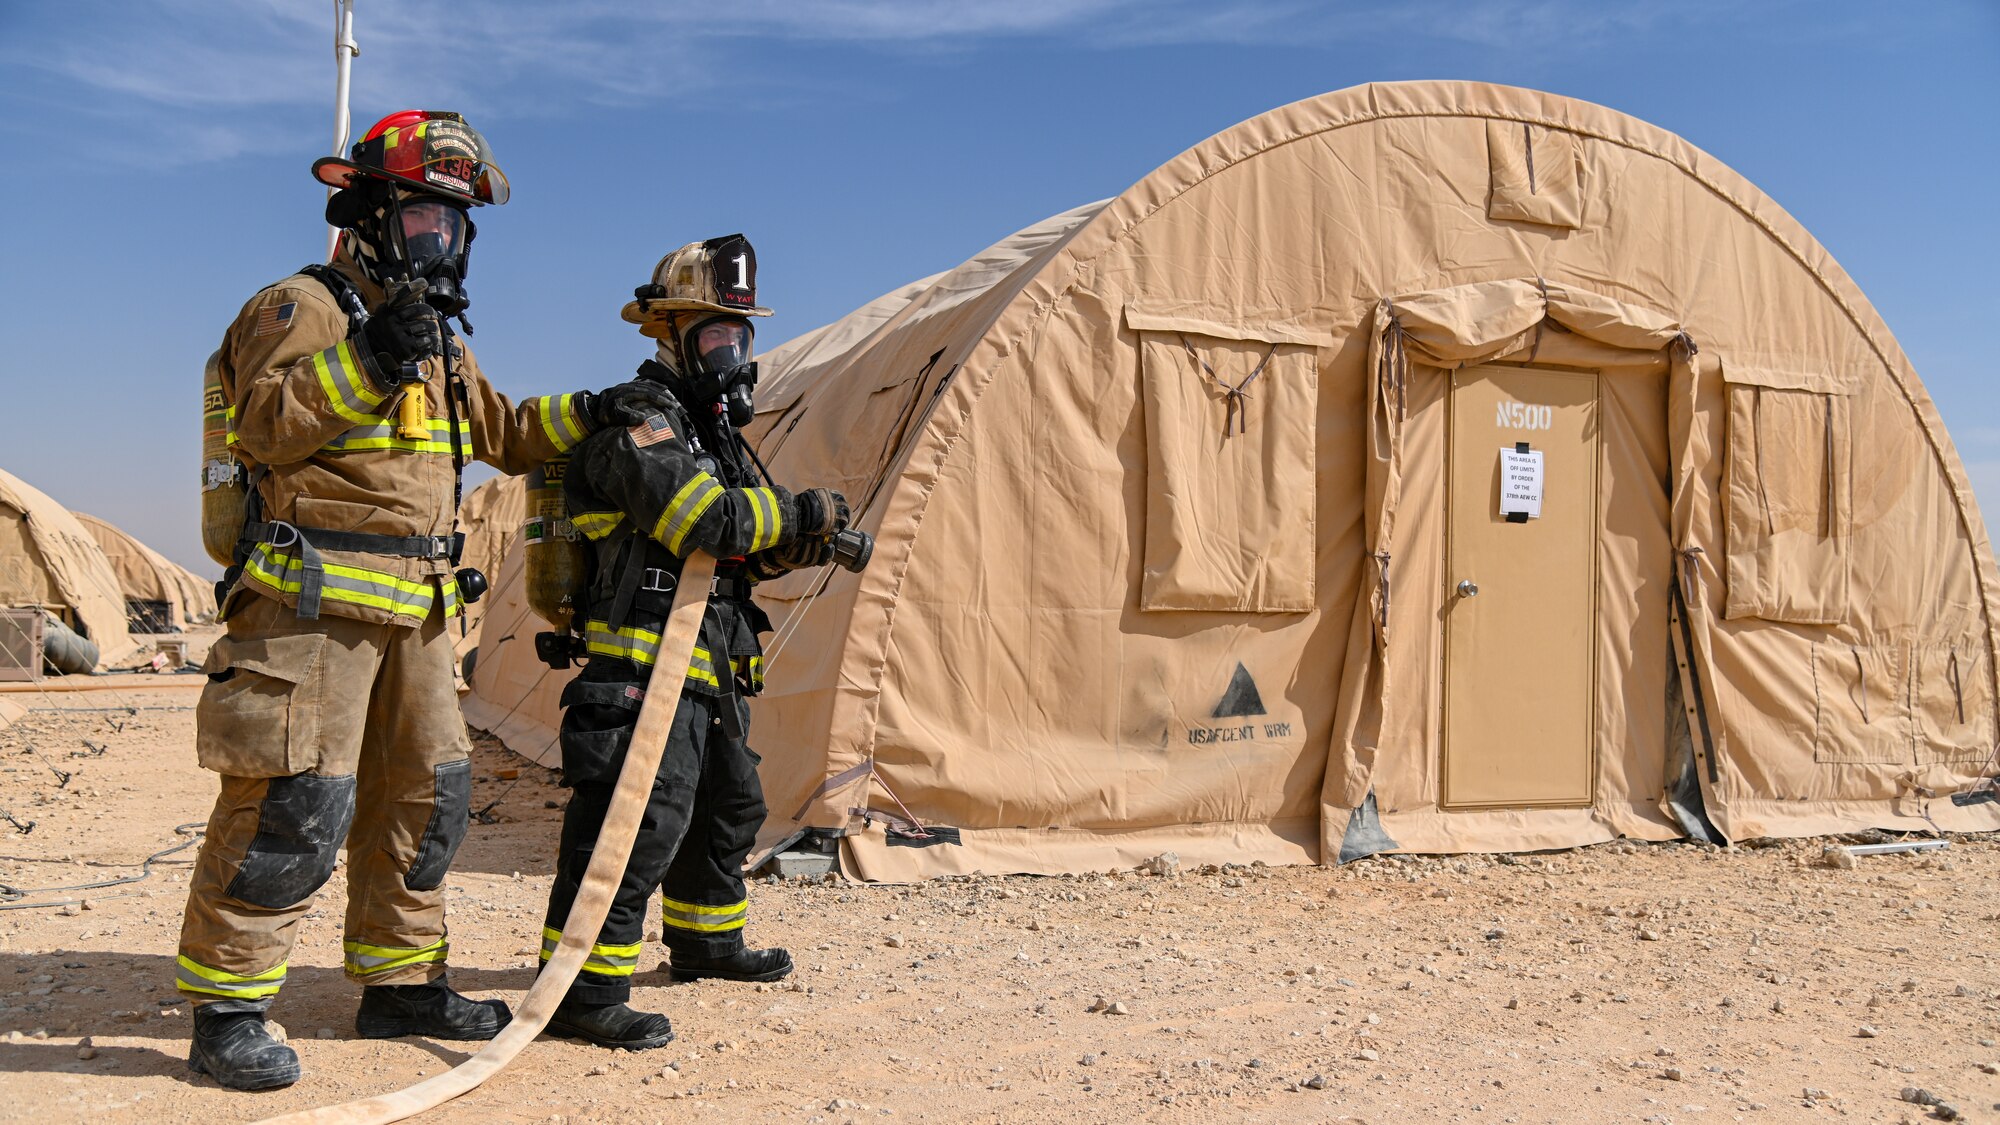 U.S. Air Force Staff Sgt. Sanjar Tursunov, left, 378th Expeditionary Civil Engineer Squadron firefighter, and Brig. Gen. Robert Davis, right, 378th Air Expeditionary Wing commander, prepare to extinguish a simulated structure fire at Prince Sultan Air Base, Kingdom of Saudi Arabia, Dec. 9, 2021. Davis spent the day training alongside members of the fire department during an immersion tour with the 378th ECES. (U.S. Air Force photo by Staff Sgt. Christina Graves)